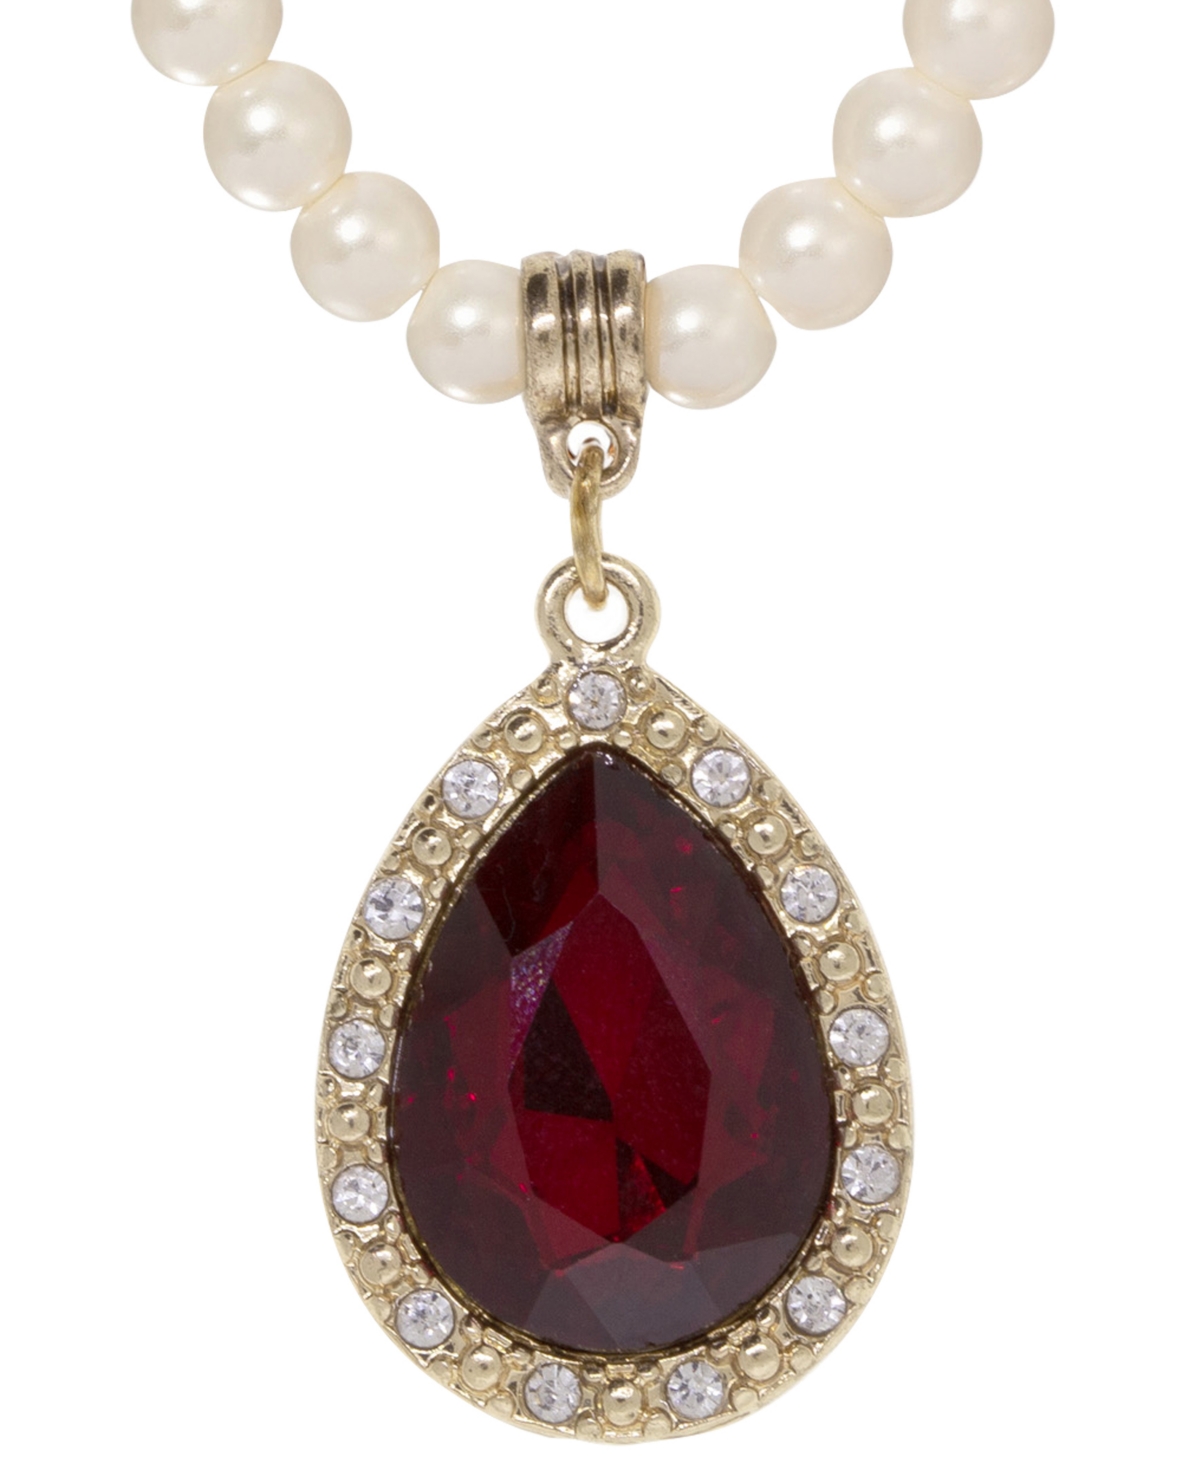 Shop 2028 Imitation Pearl Red Glass Crystal Pendant Necklace